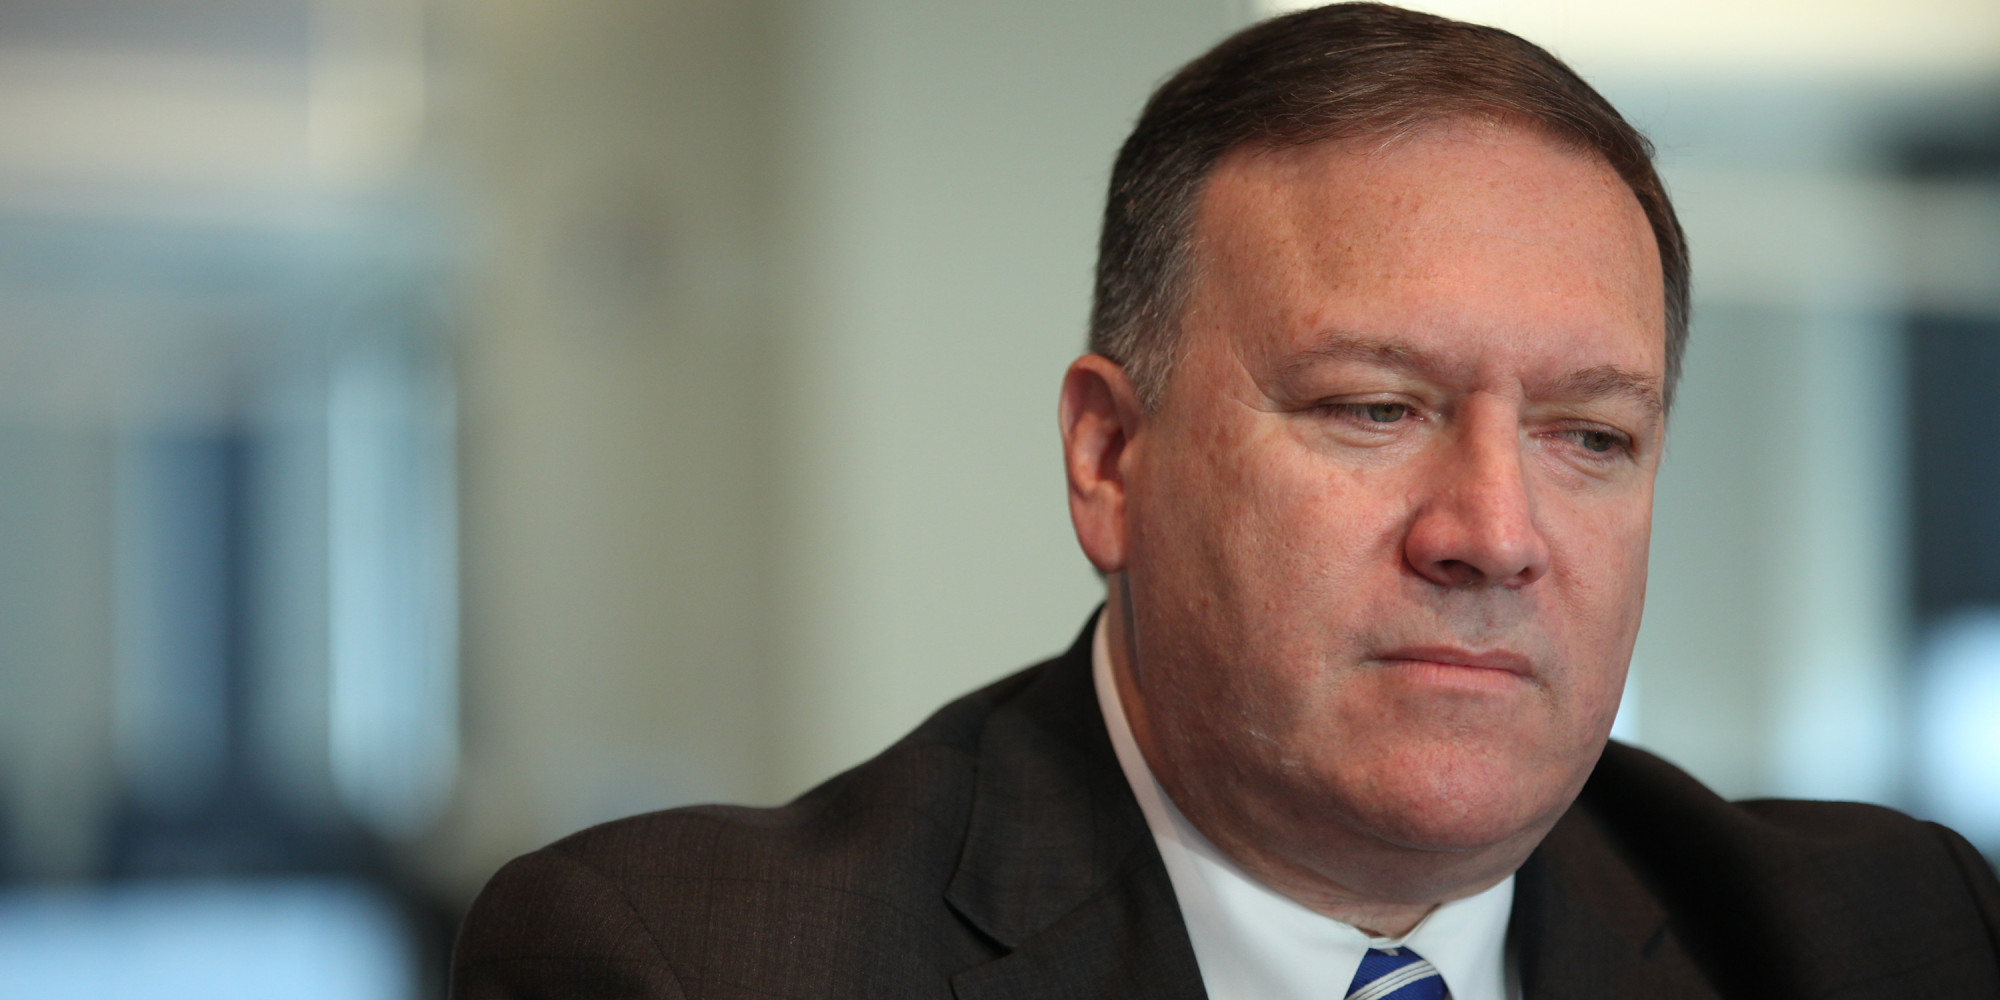 Representative Michael "Mike" Pompeo, a Republican from Kansas, pauses during an interview in Washington D.C., U.S. on Friday, Sept. 20, 2013. Pompeo of won an election for the first time in 2010 following a career as an army officer, tax lawyer, aerospace entrepreneur and Republican National Committee member. Photographer: Julia Schmalz/Bloomberg via Getty Images